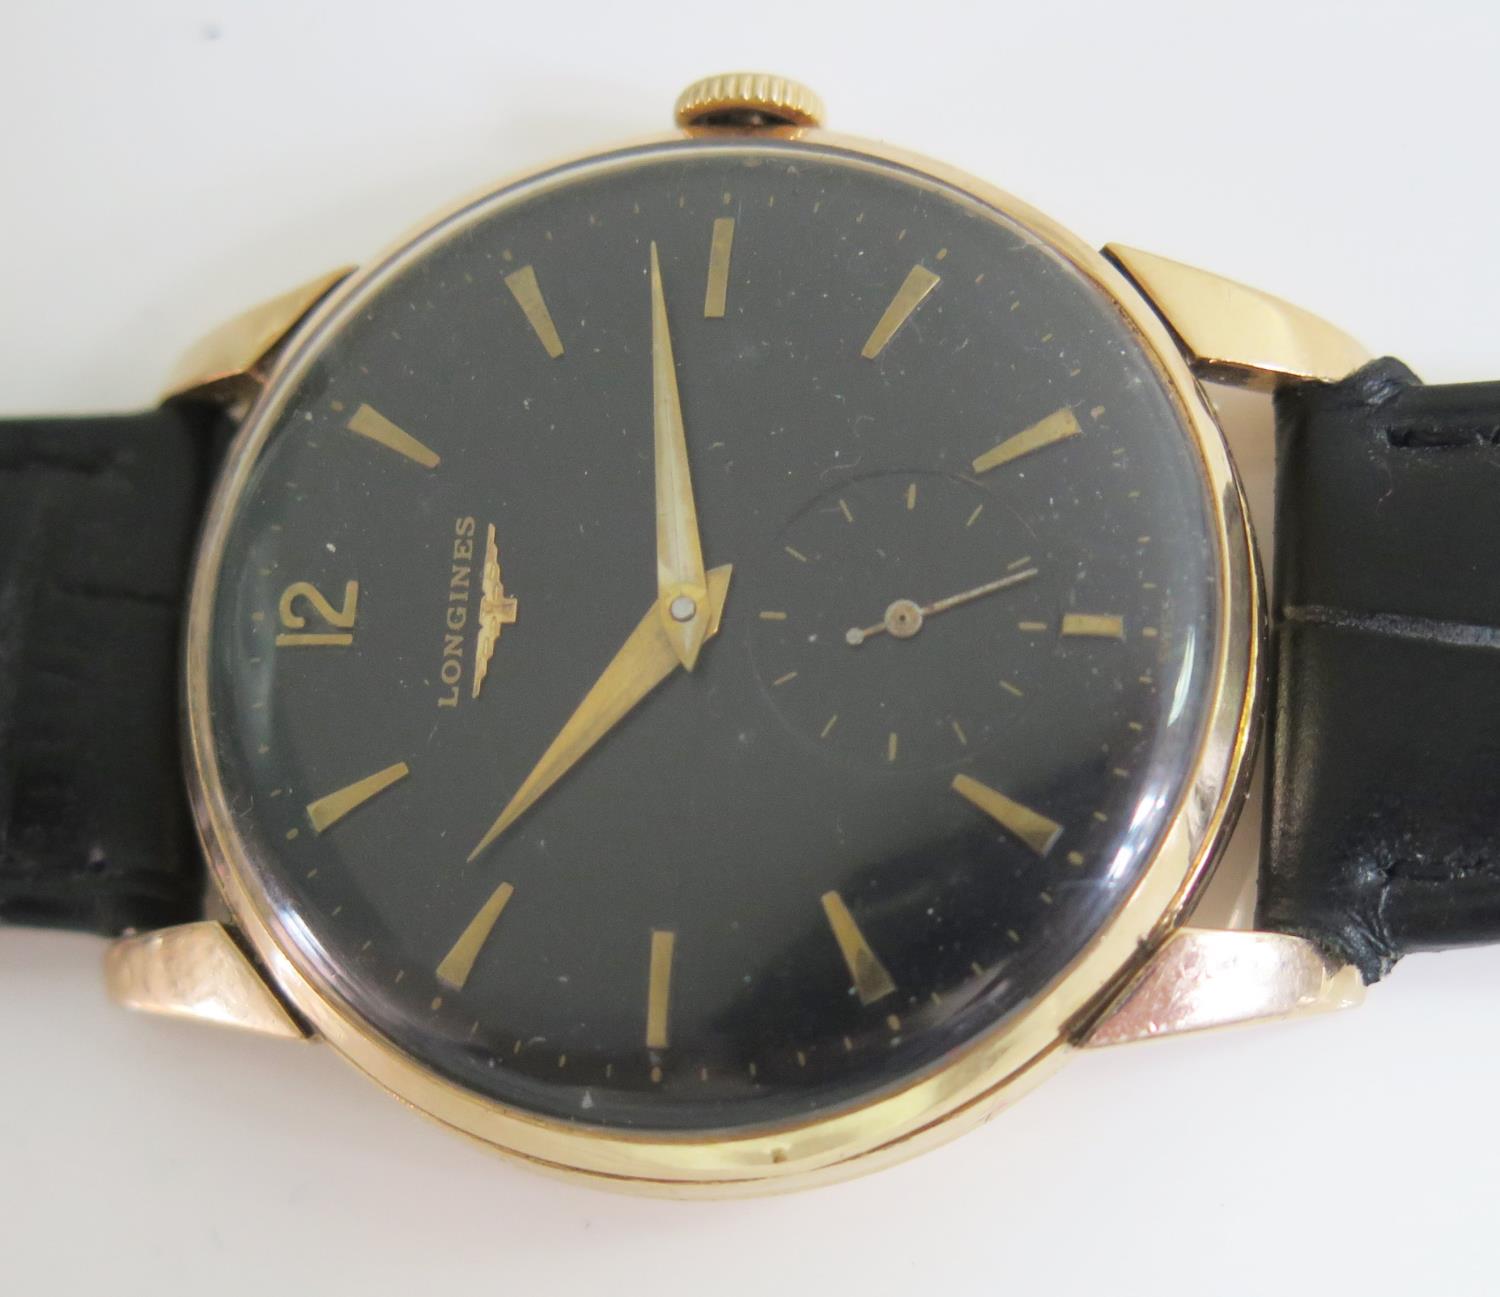 A Gent's Longines Manual Wristwatch in an 18k gold 37mm case, 12.68z movement no. 9535773, running